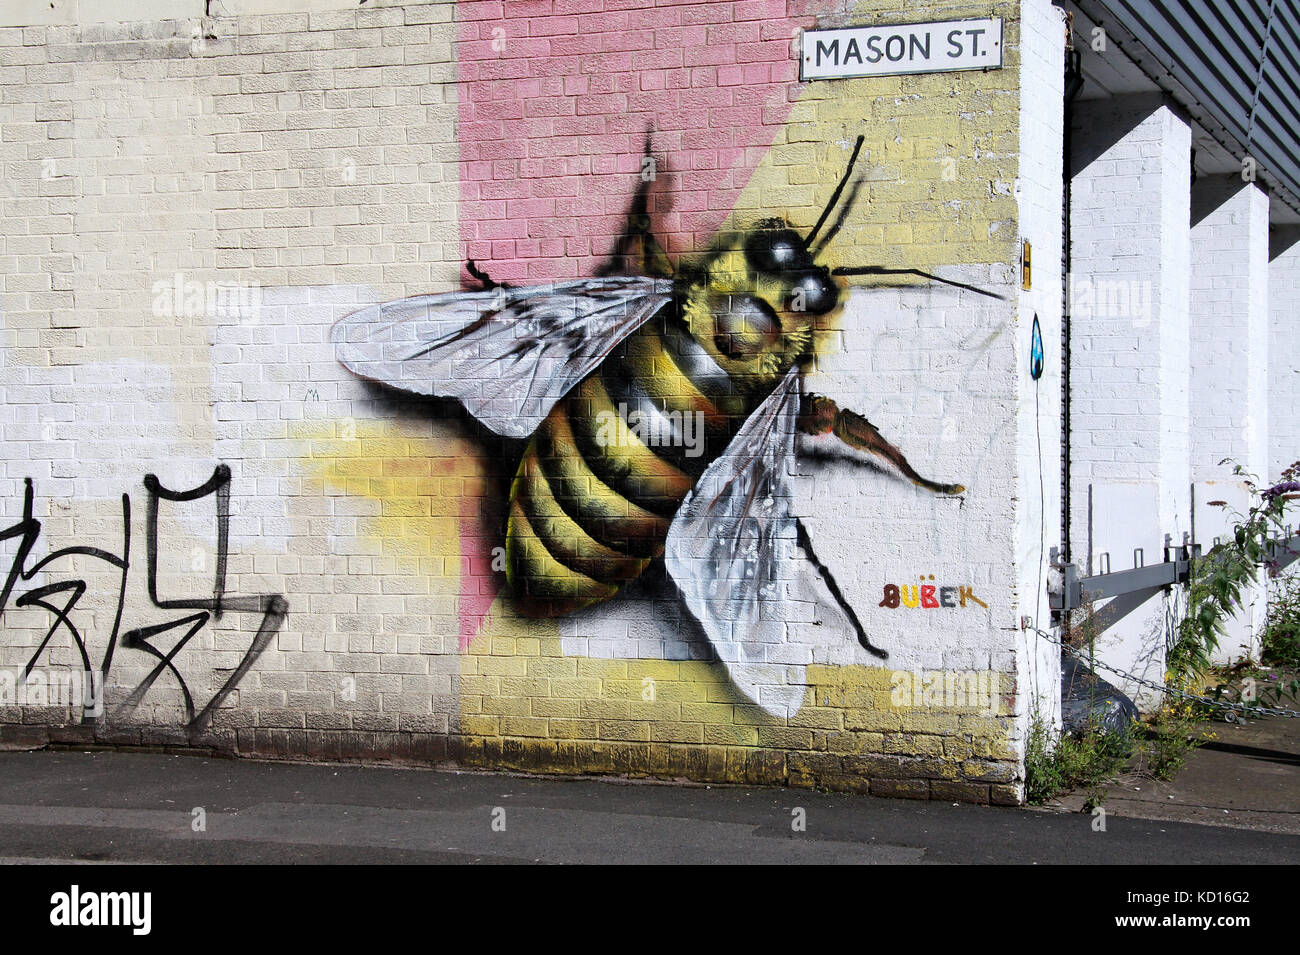 Mason Street with symbolic worker bee street art in the Northern Quarter of Manchester Stock Photo